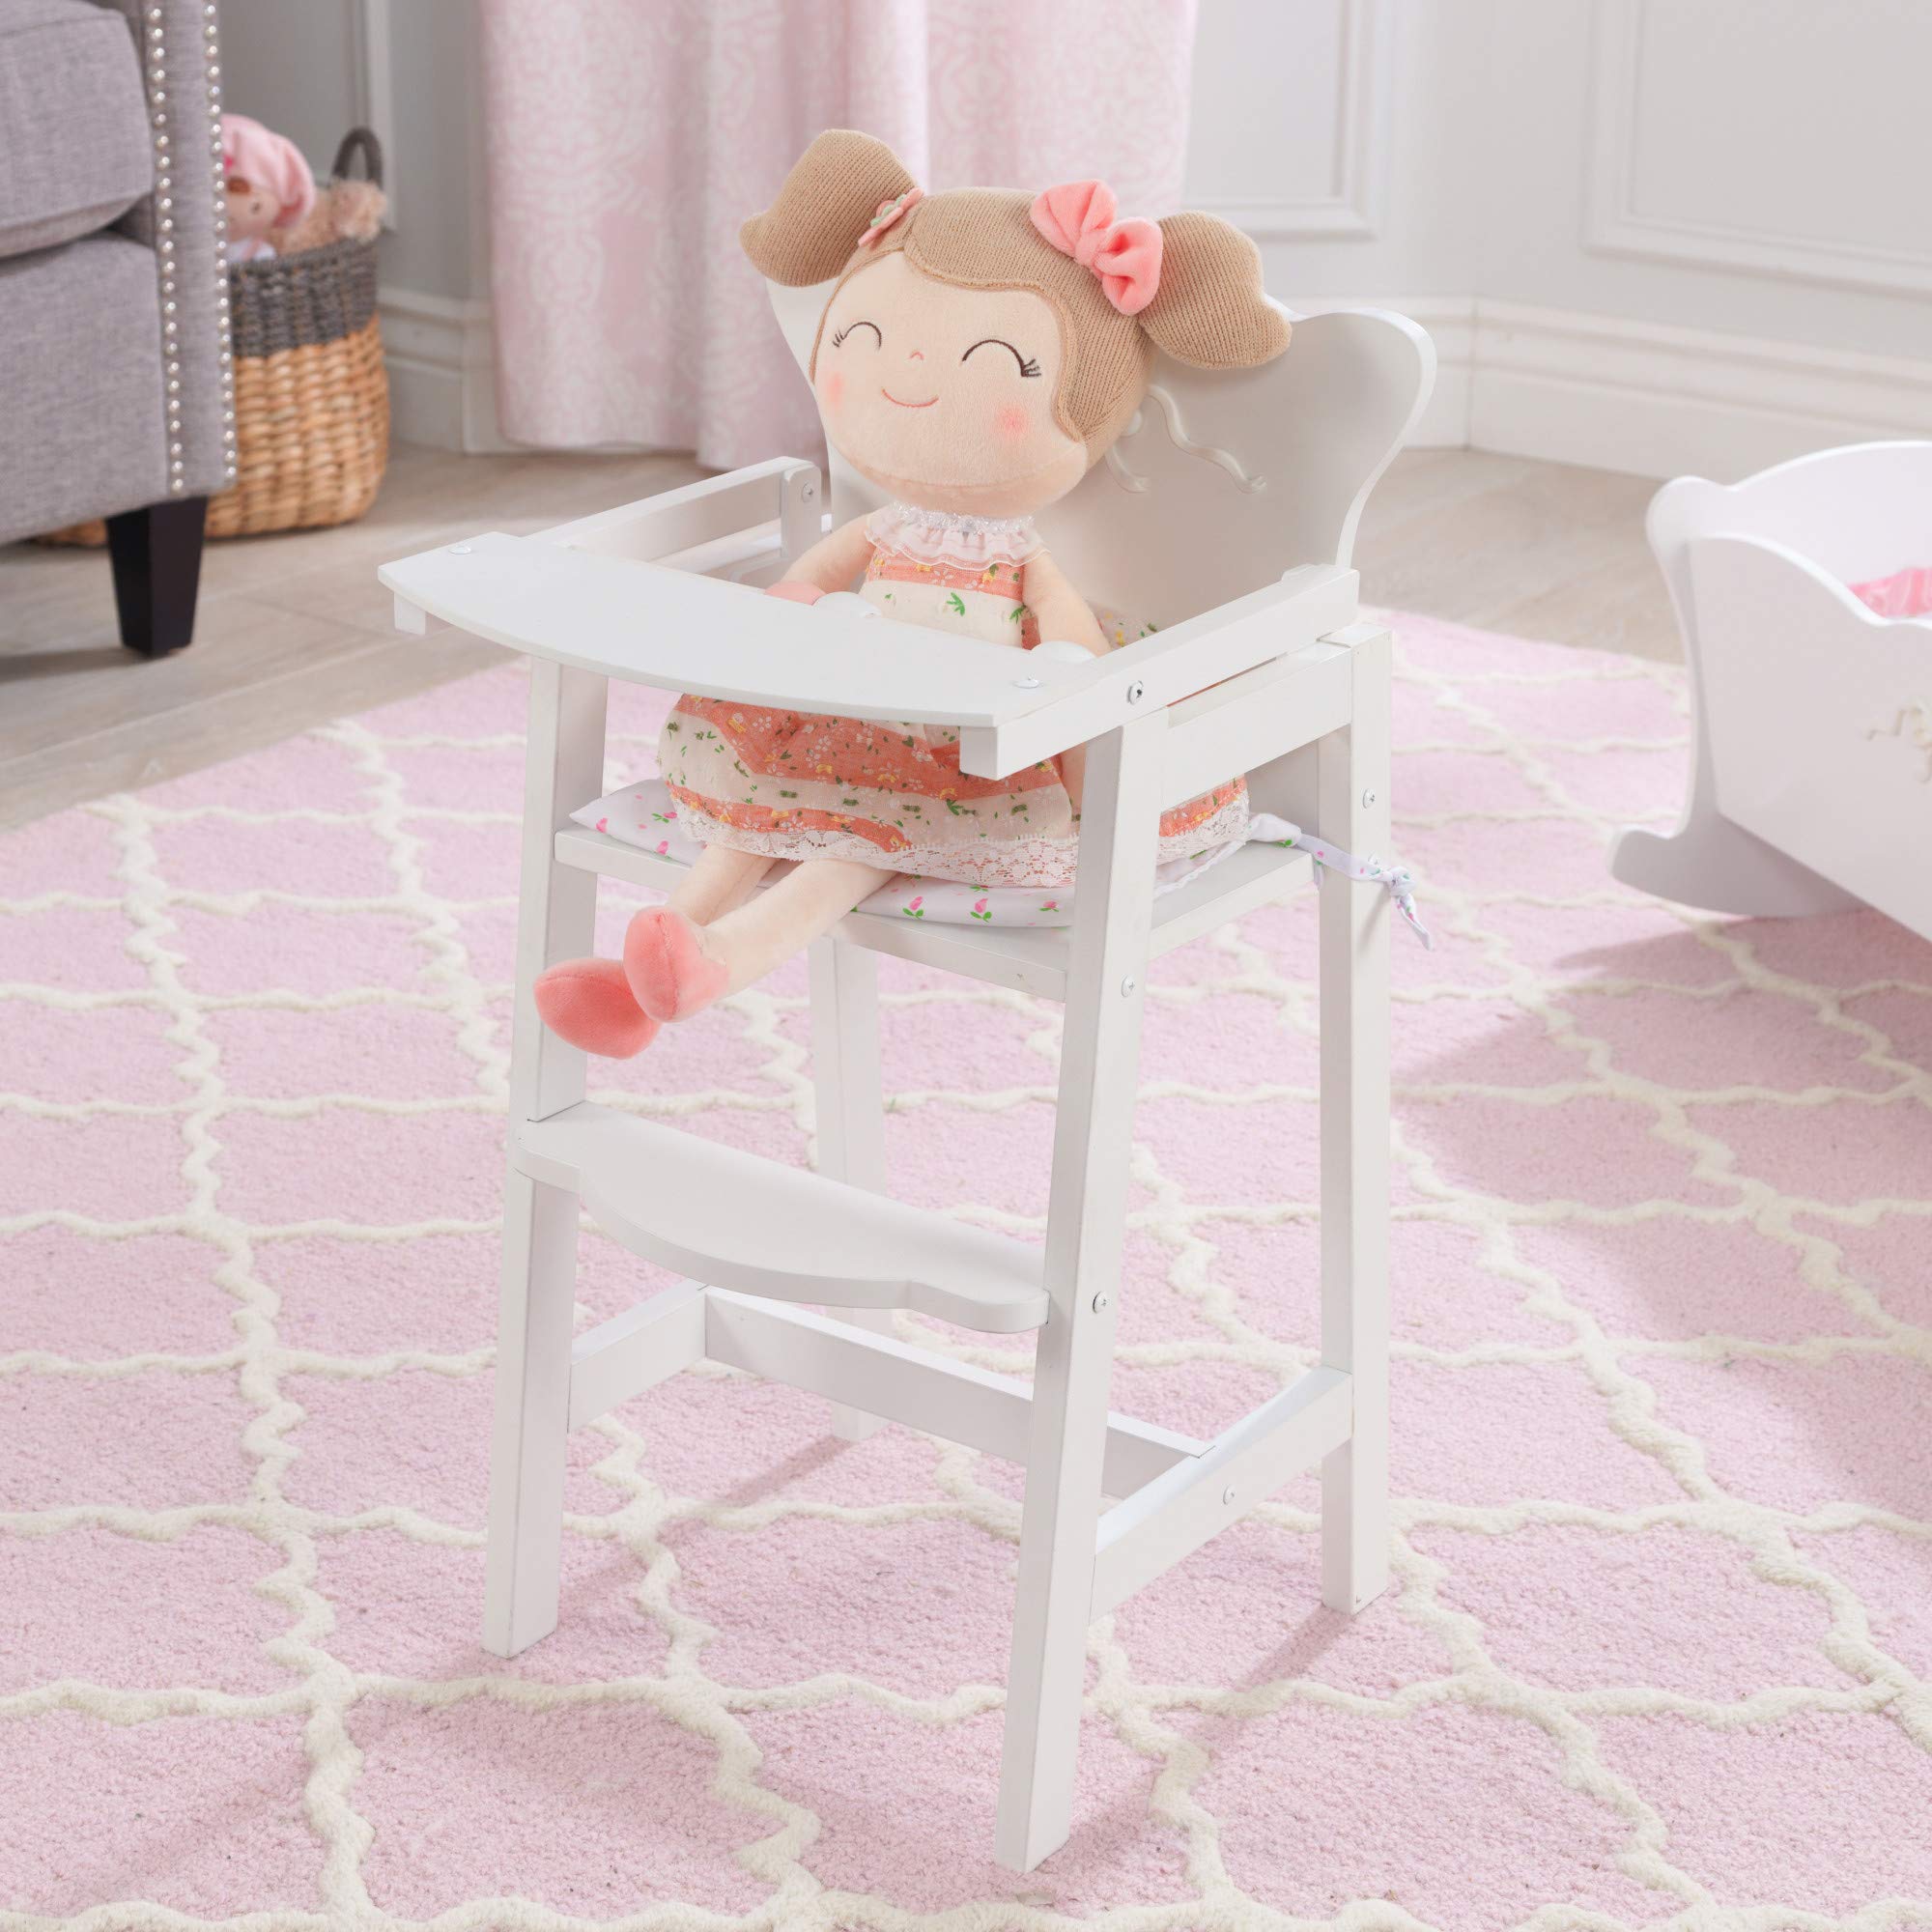 KidKraft Tiffany Bow Scalloped-Edge Wooden Lil Doll High Chair with Seat Pad - White, Gift for Ages 3+